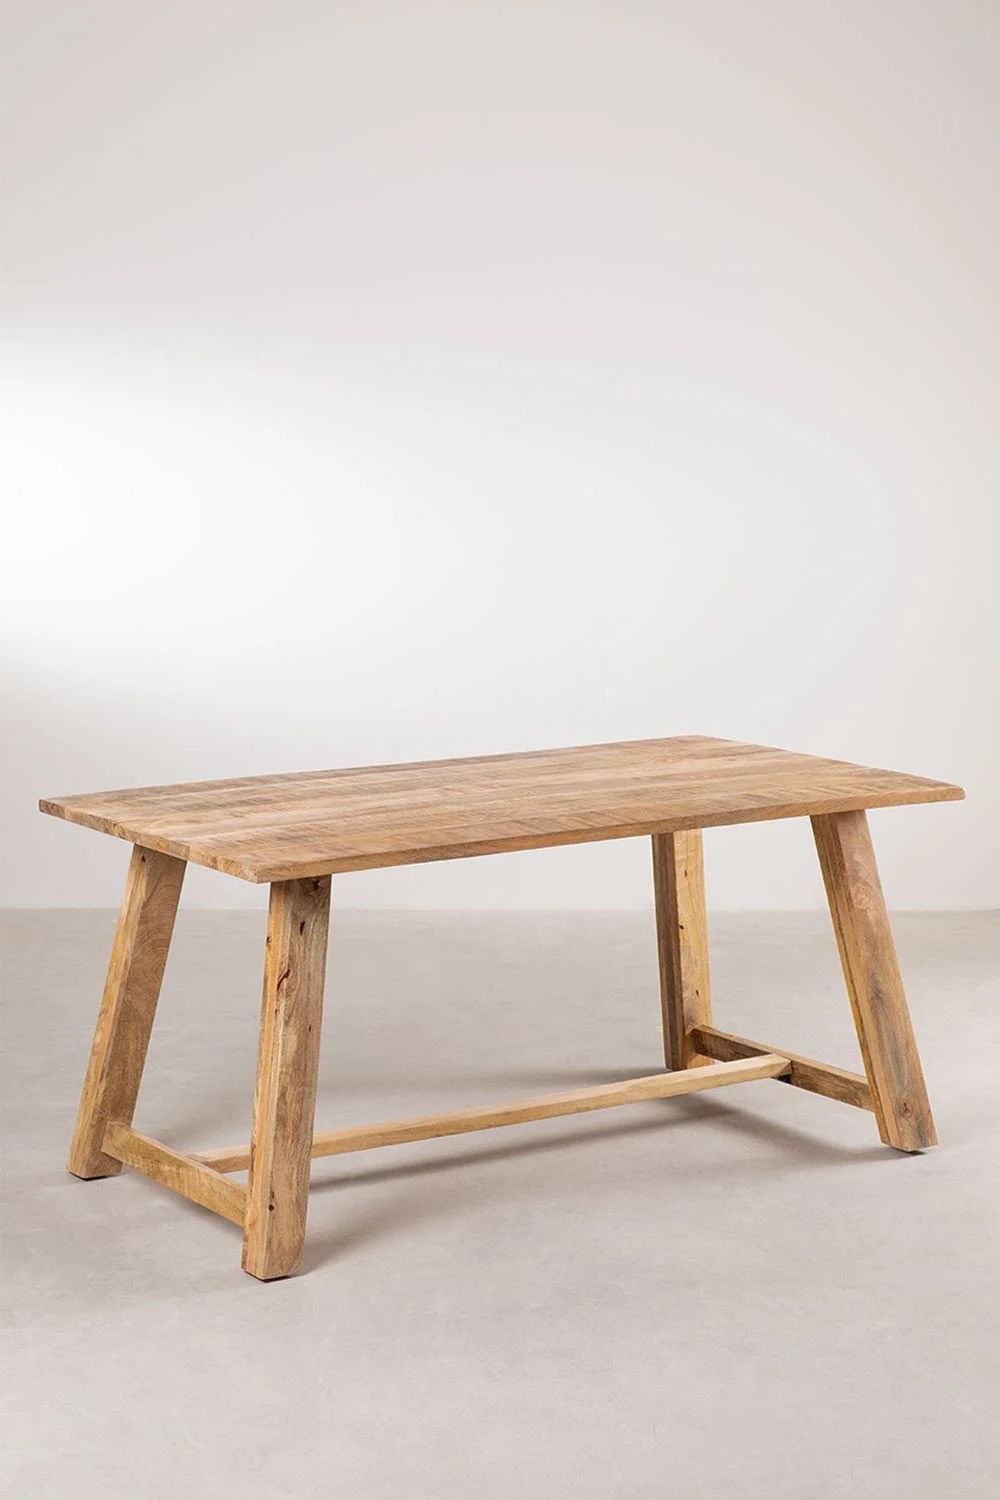 The Solid Wood Table 